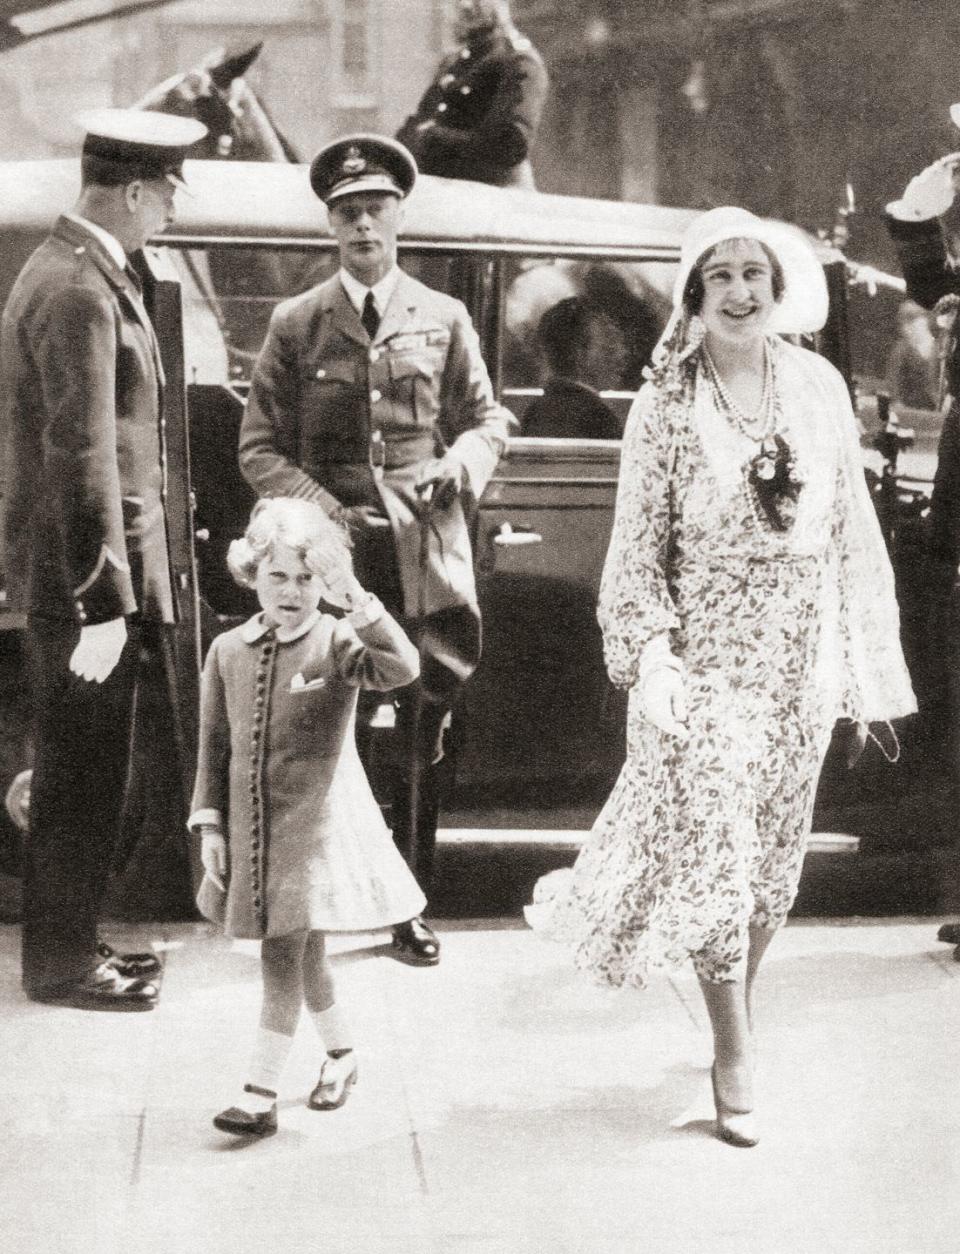 <p>Princess Elizabeth of York seen here in 1931 aged five, arriving at the Royal Tournament with her parents, the Duke and Duchess of York.</p>